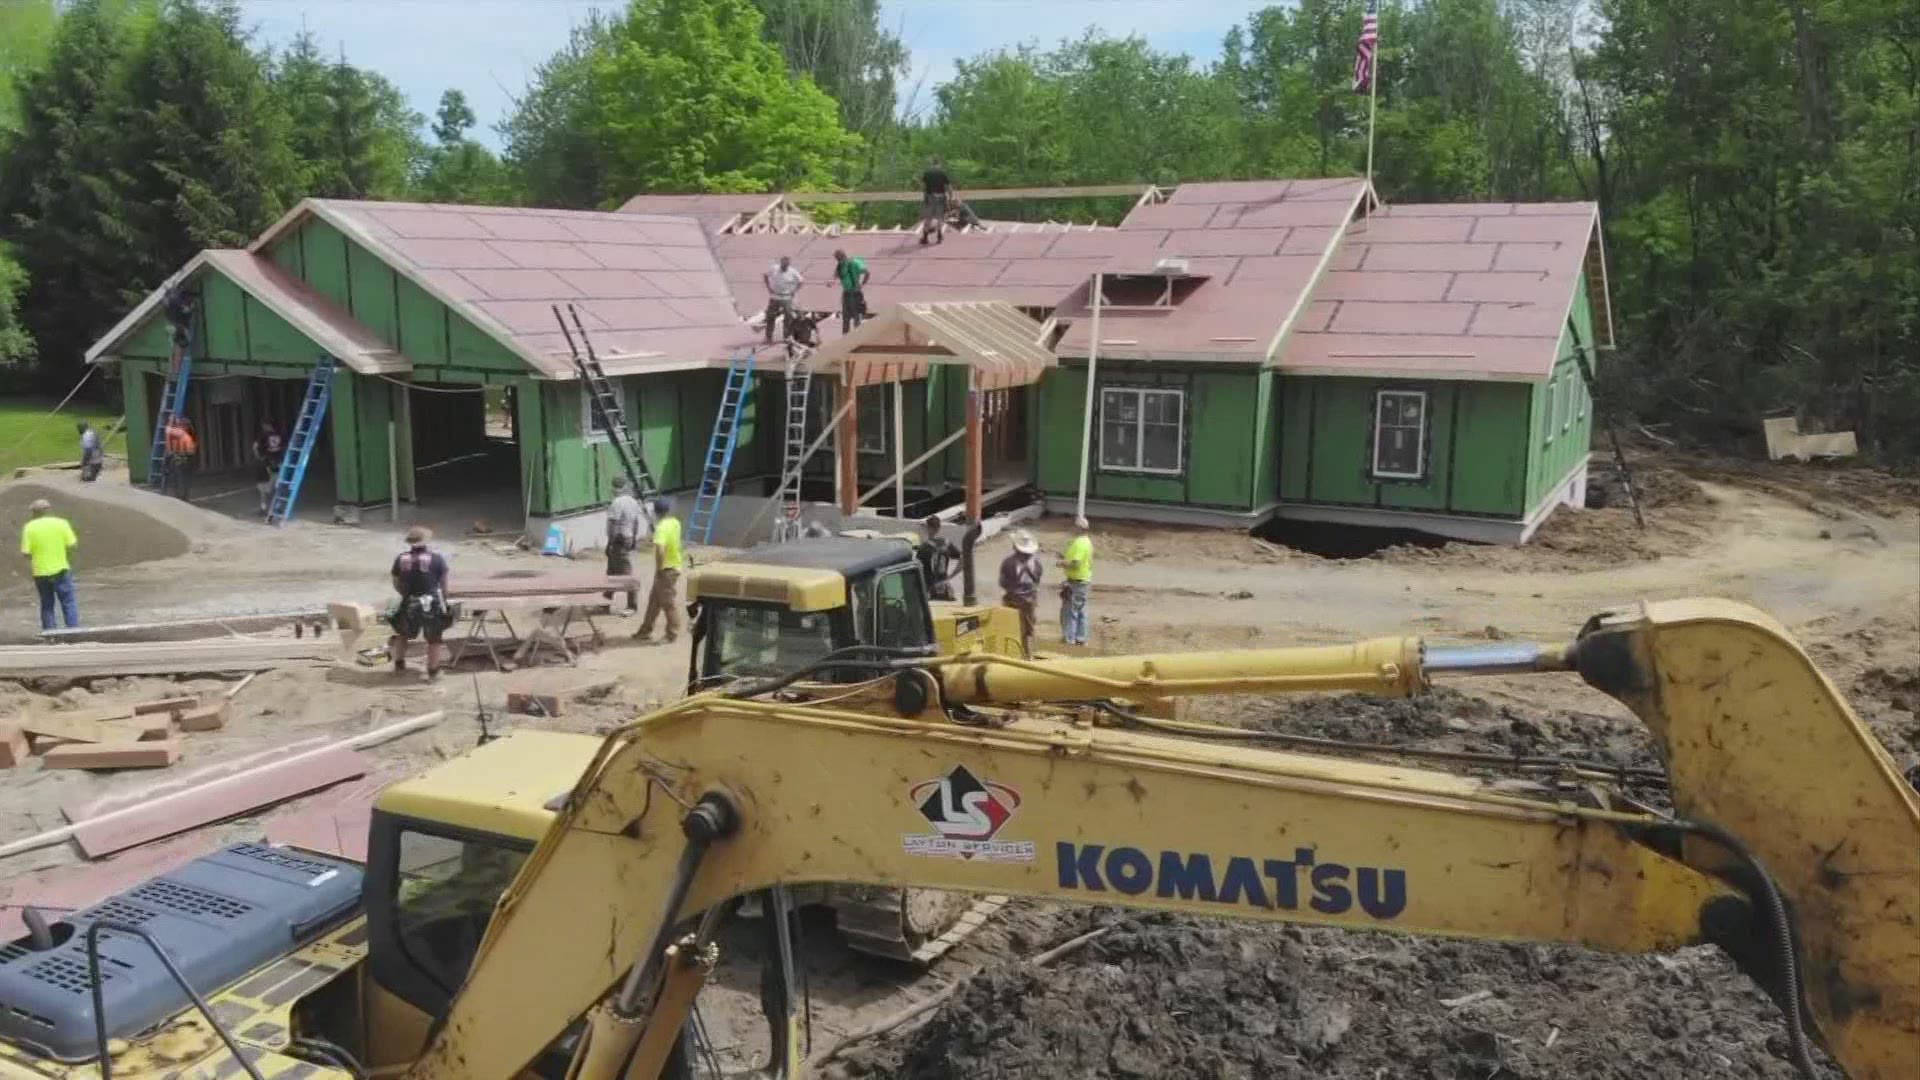 More than 100 firefighters from 14 states are pitching in to build the home in just about two weeks.